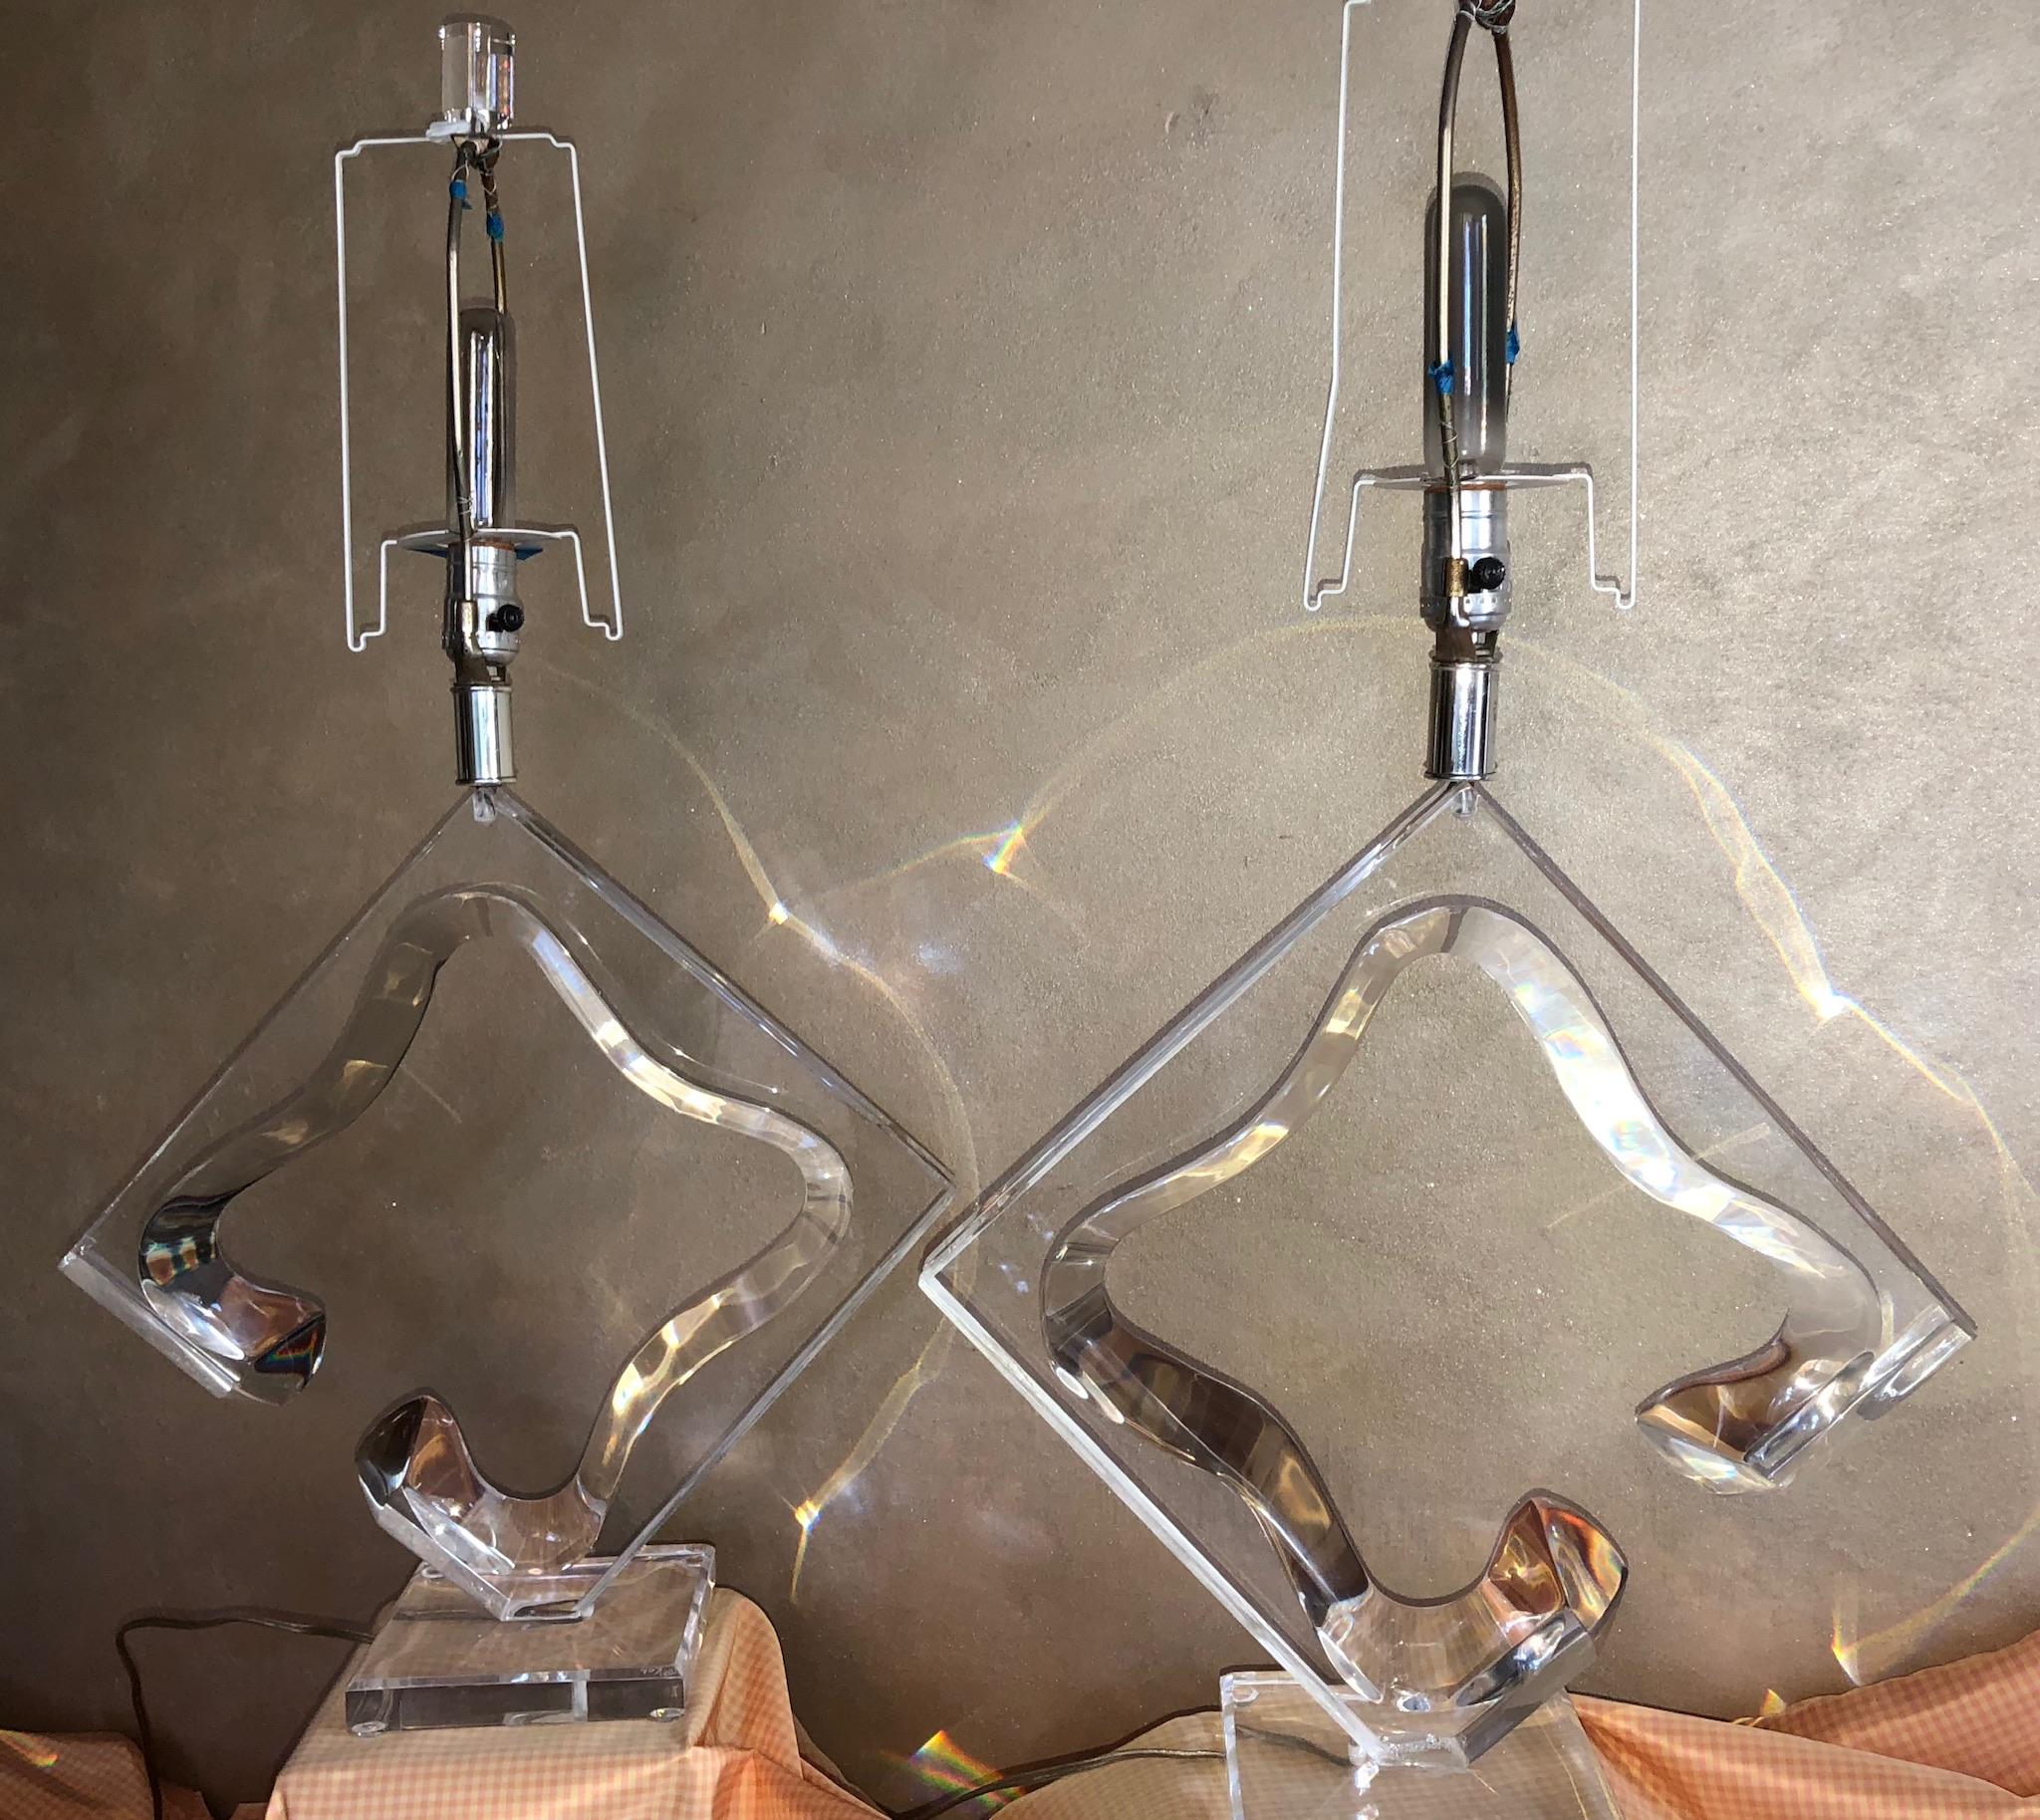 Pair of large and imposing abstract sculptural Lucite lamps, signed by Hivo Van Teal circa 1970. This style is perhaps his most iconic (he also made similar sculptures). This lamp is hard to find in pairs, especially in such prime condition. Hivo